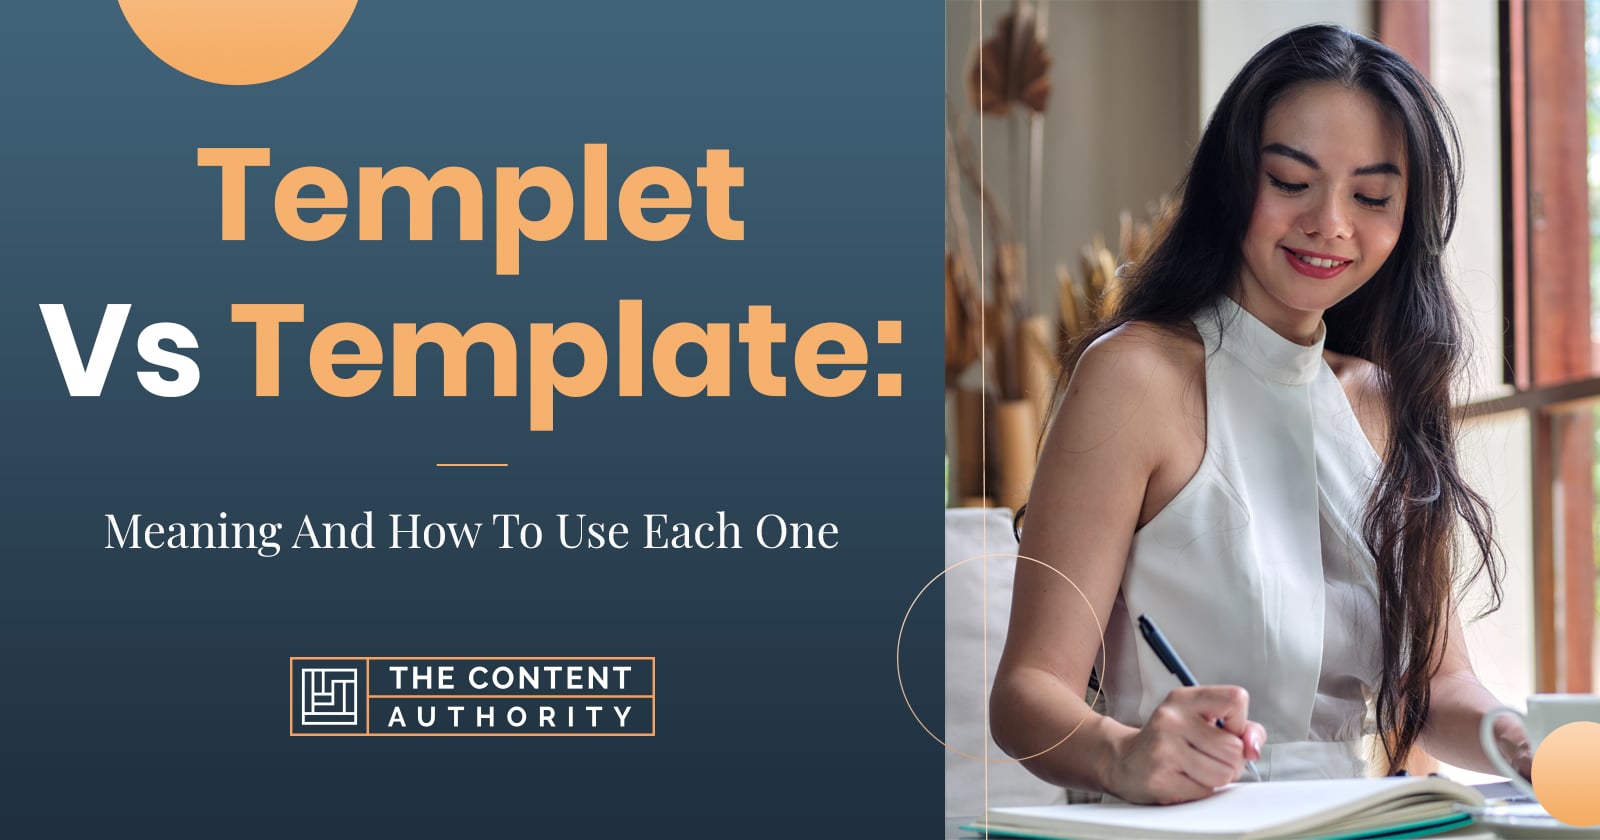 Templet Vs. Template Meaning And How To Use Each One